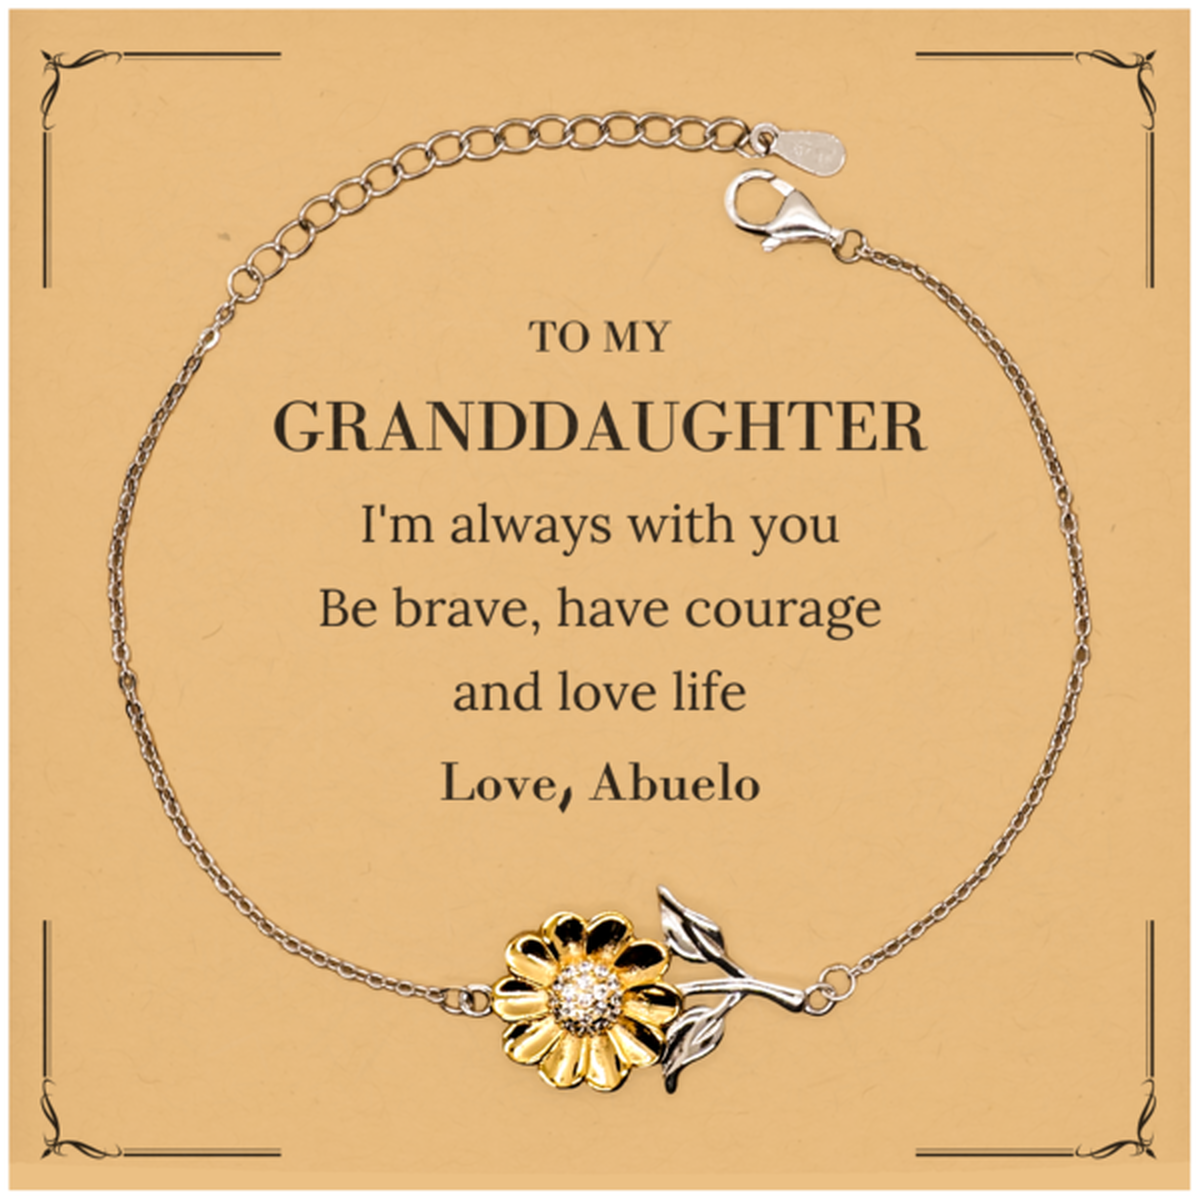 To My Granddaughter Gifts from Abuelo, Unique Sunflower Bracelet Inspirational Christmas Birthday Graduation Gifts for Granddaughter I'm always with you. Be brave, have courage and love life. Love, Abuelo